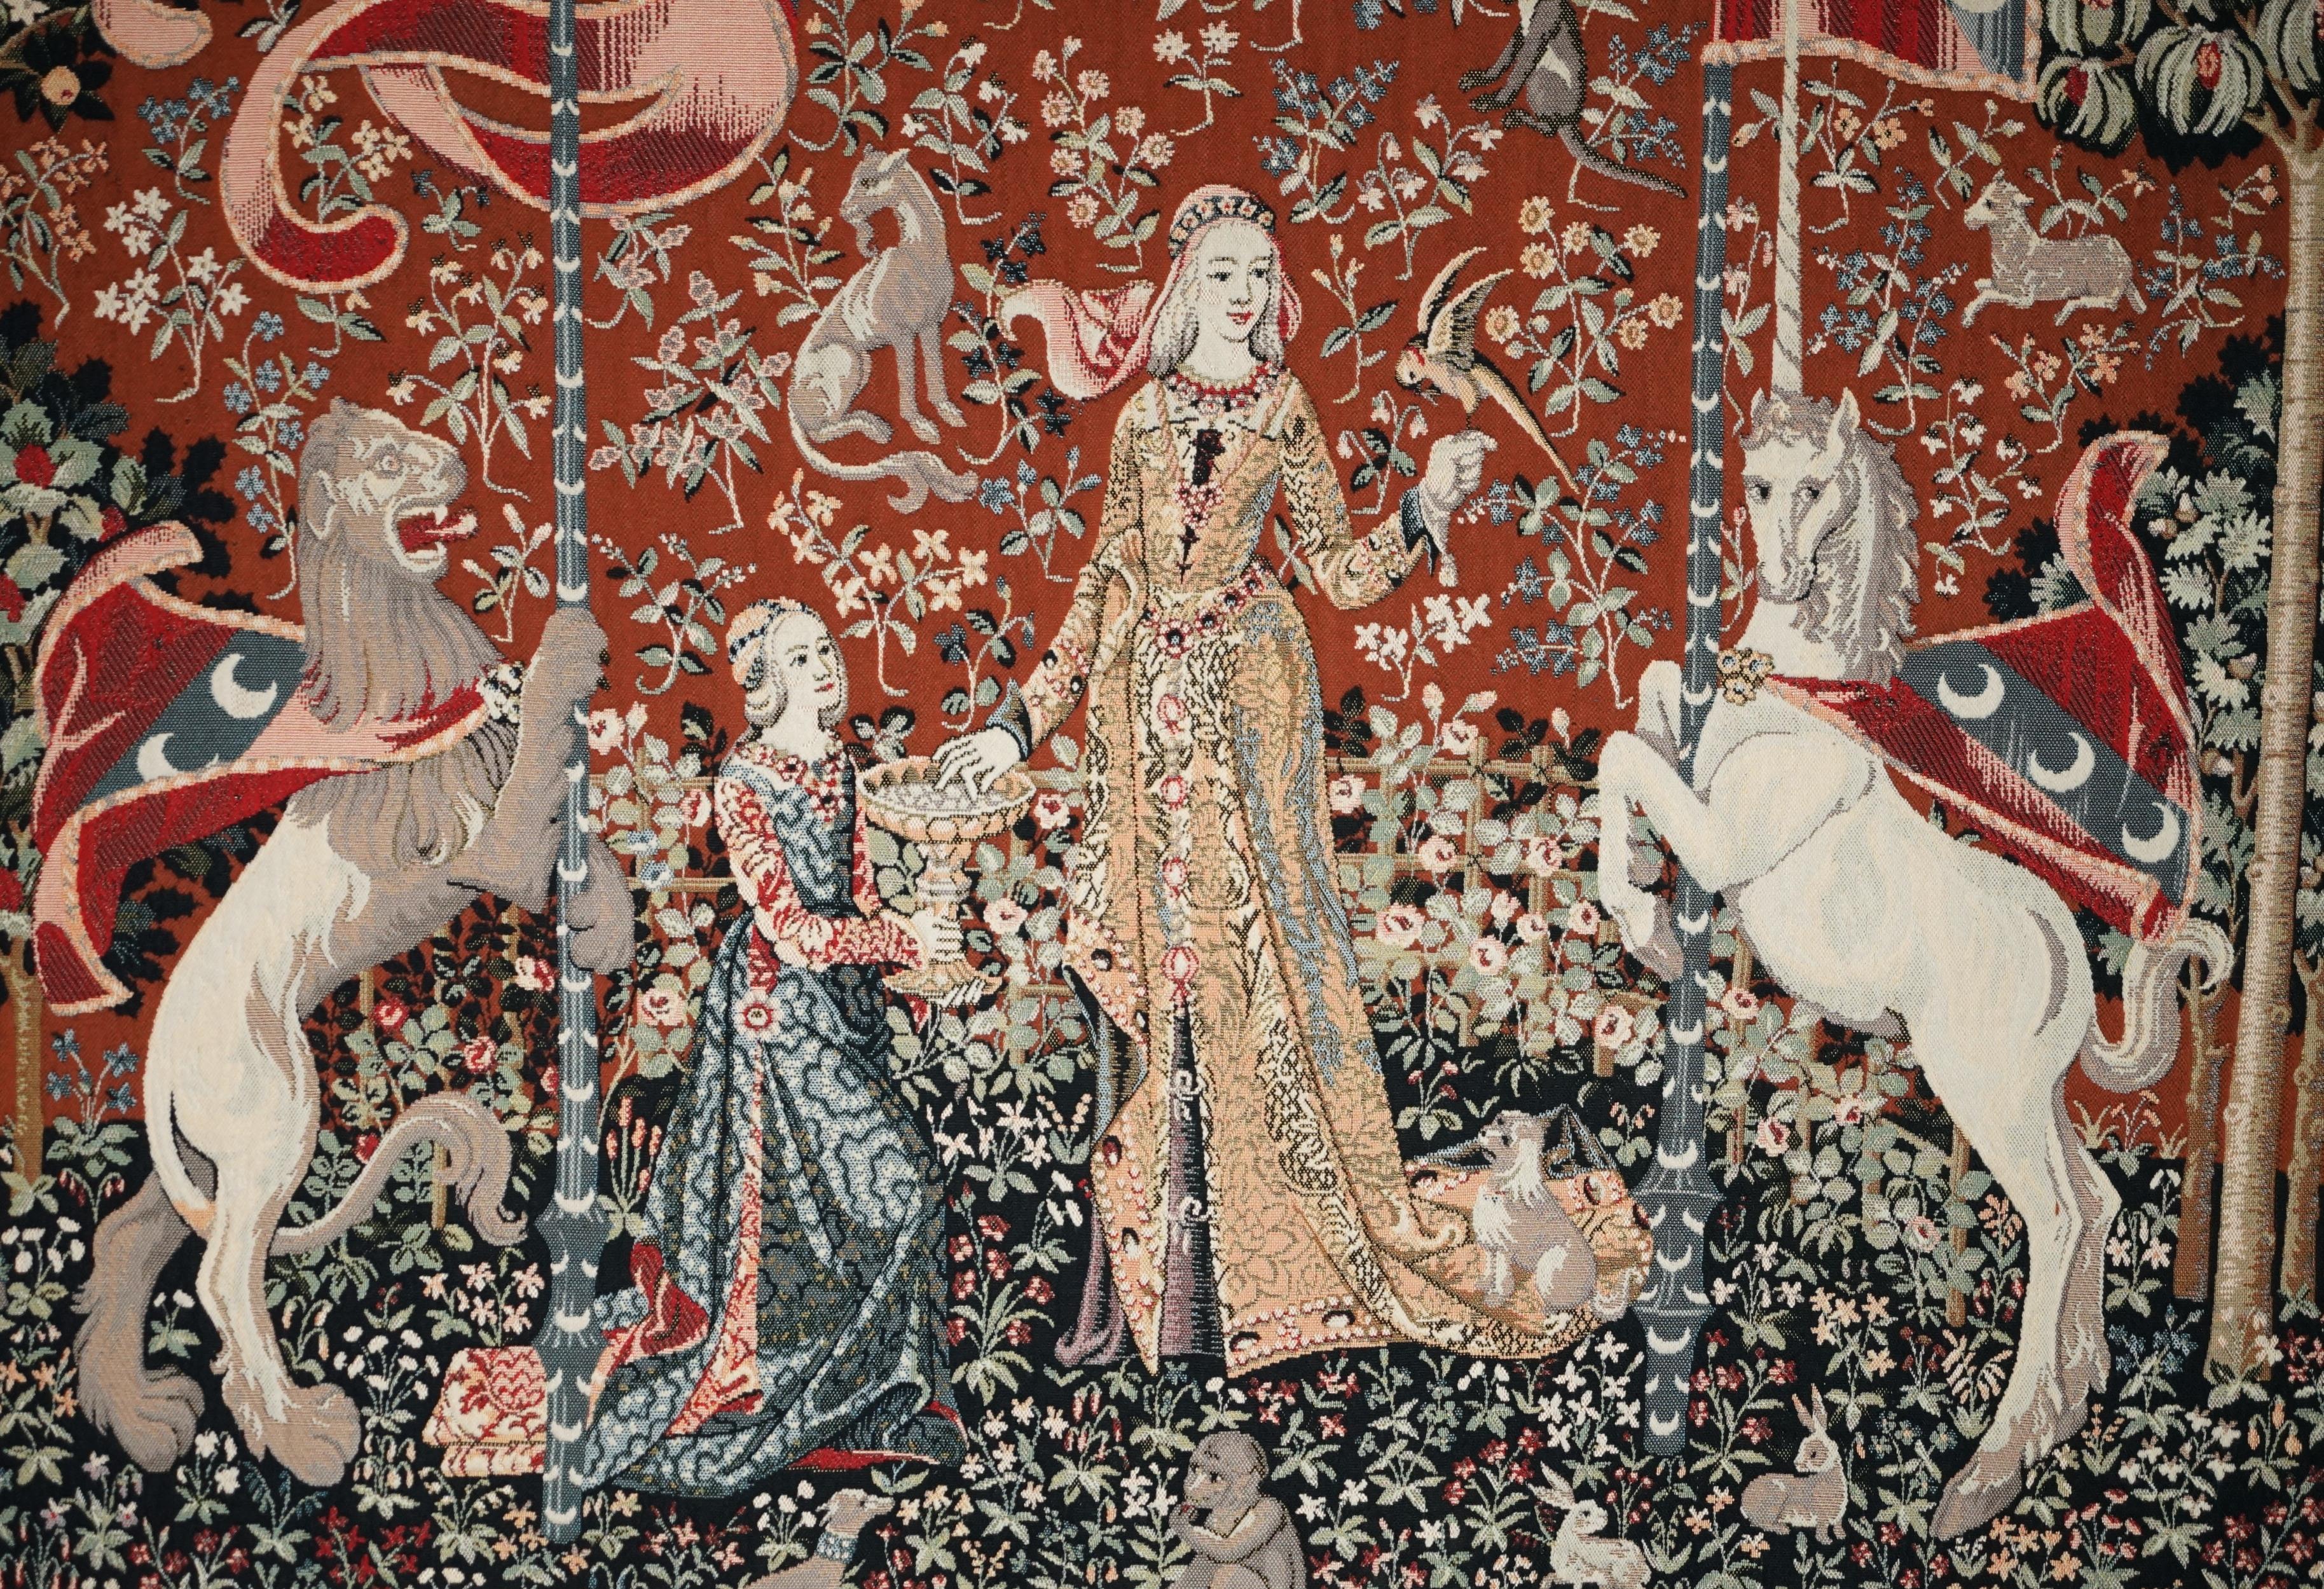 Edwardian ViNTAGE THE LADY AND THE UNICORN LARGE WALL HANGING WOVEN TAPESTRY 216CM X 189CM